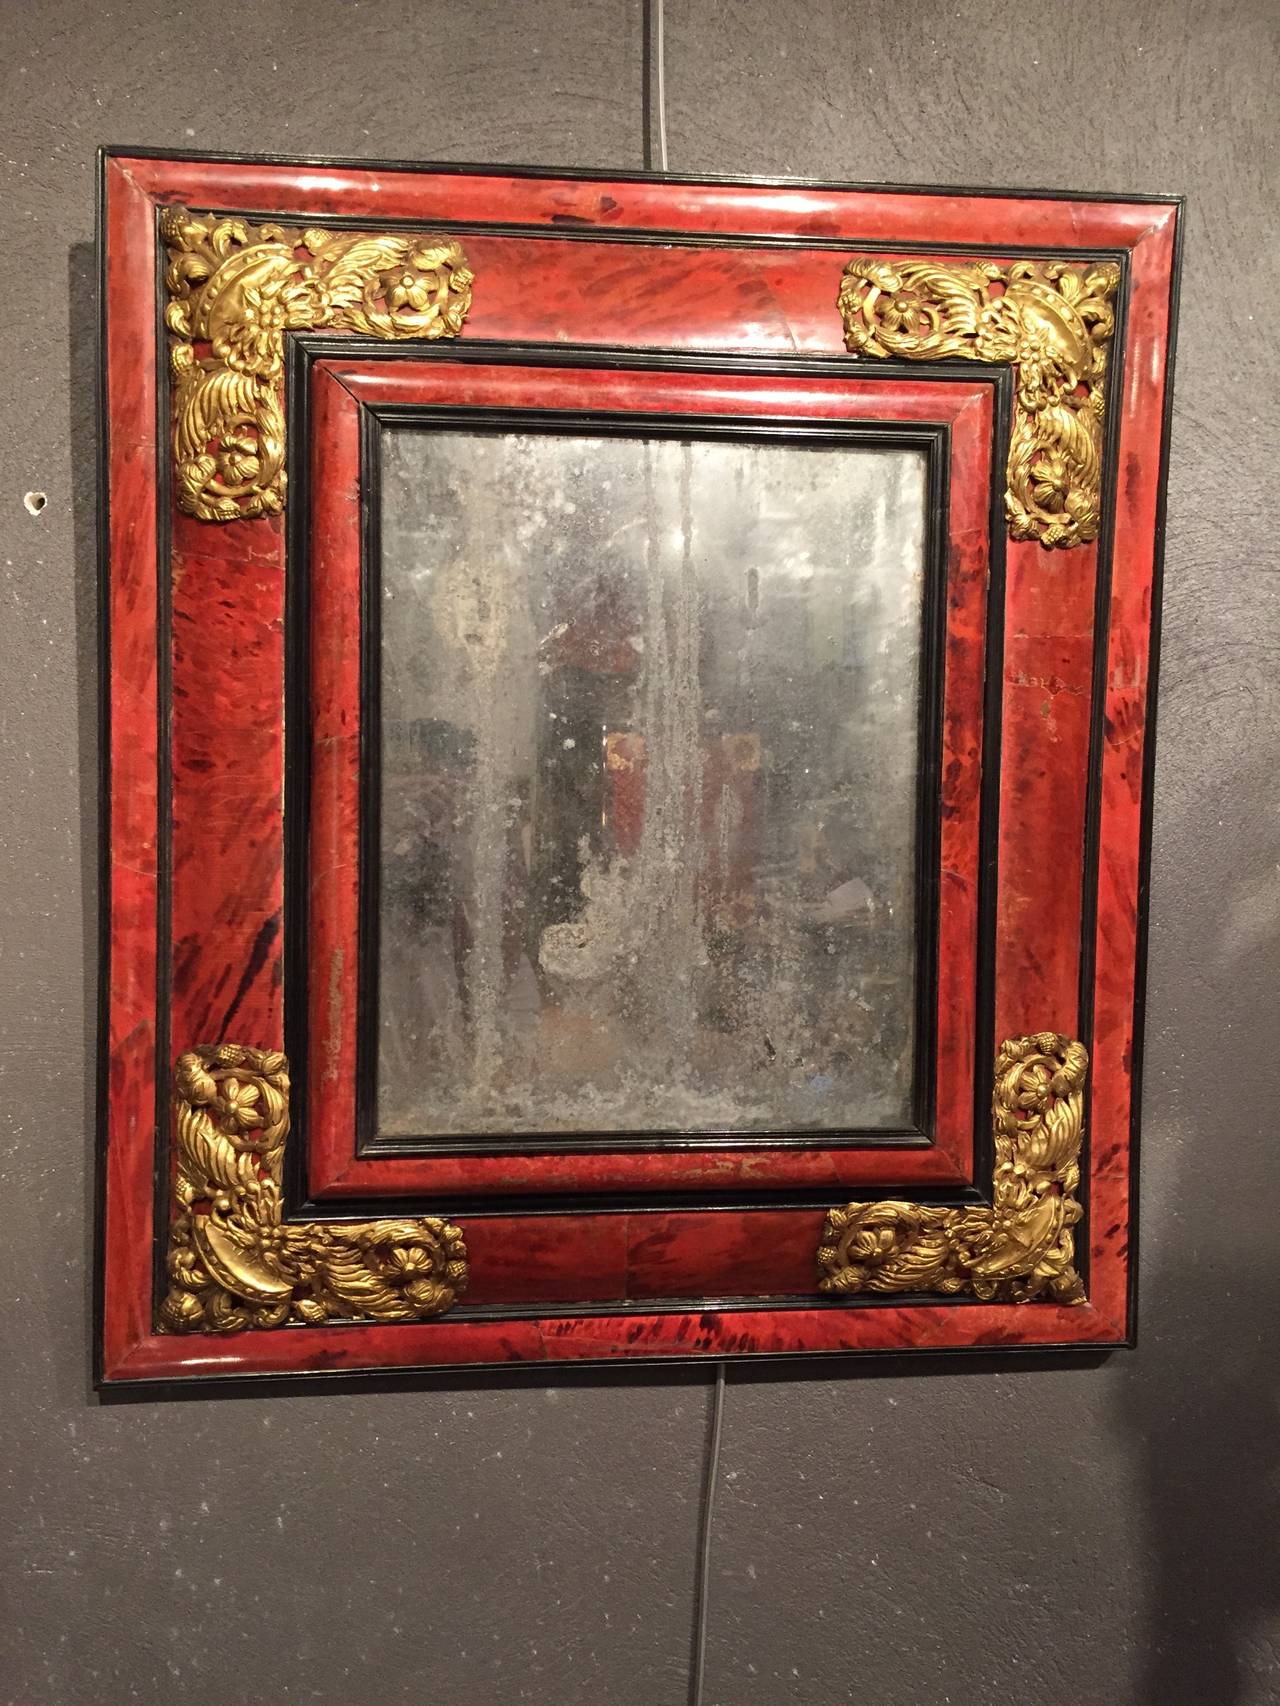 Flemish 17th century red tortoiseshell mirror
Rare double inverted mirror frames profiles.
Model in red tortoiseshell veneer (green turtle), ebony and copper rods carved spandrels and repelled decorated with foliage flowers.

Soul tree.

Glass